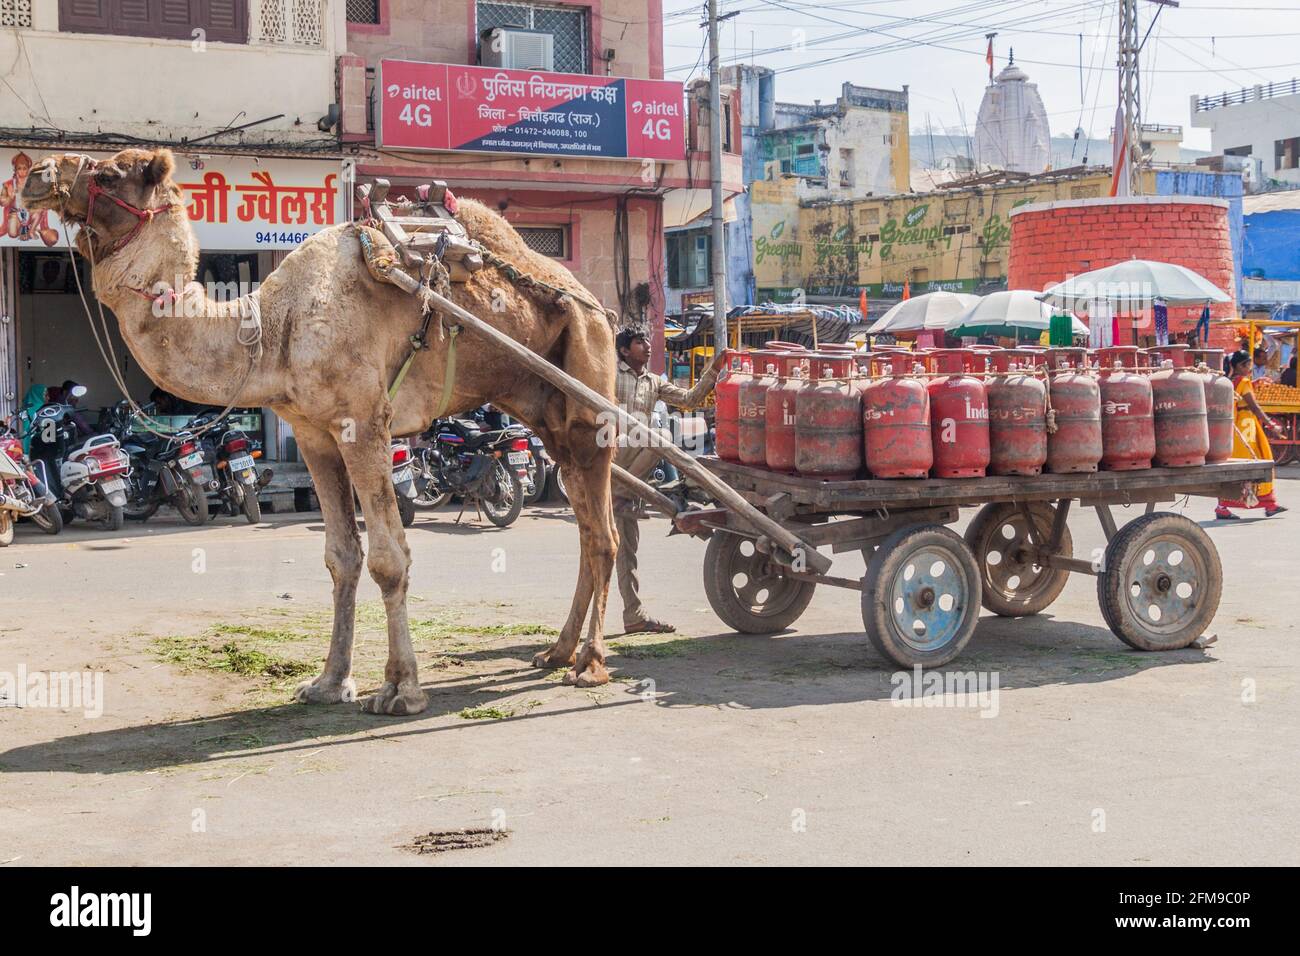 CHITTORGARH, INDIA - FEBRUARY 15, 2017: Camel pulling gas cylinders in Chittorgarh, Rajasthan state, India Stock Photo